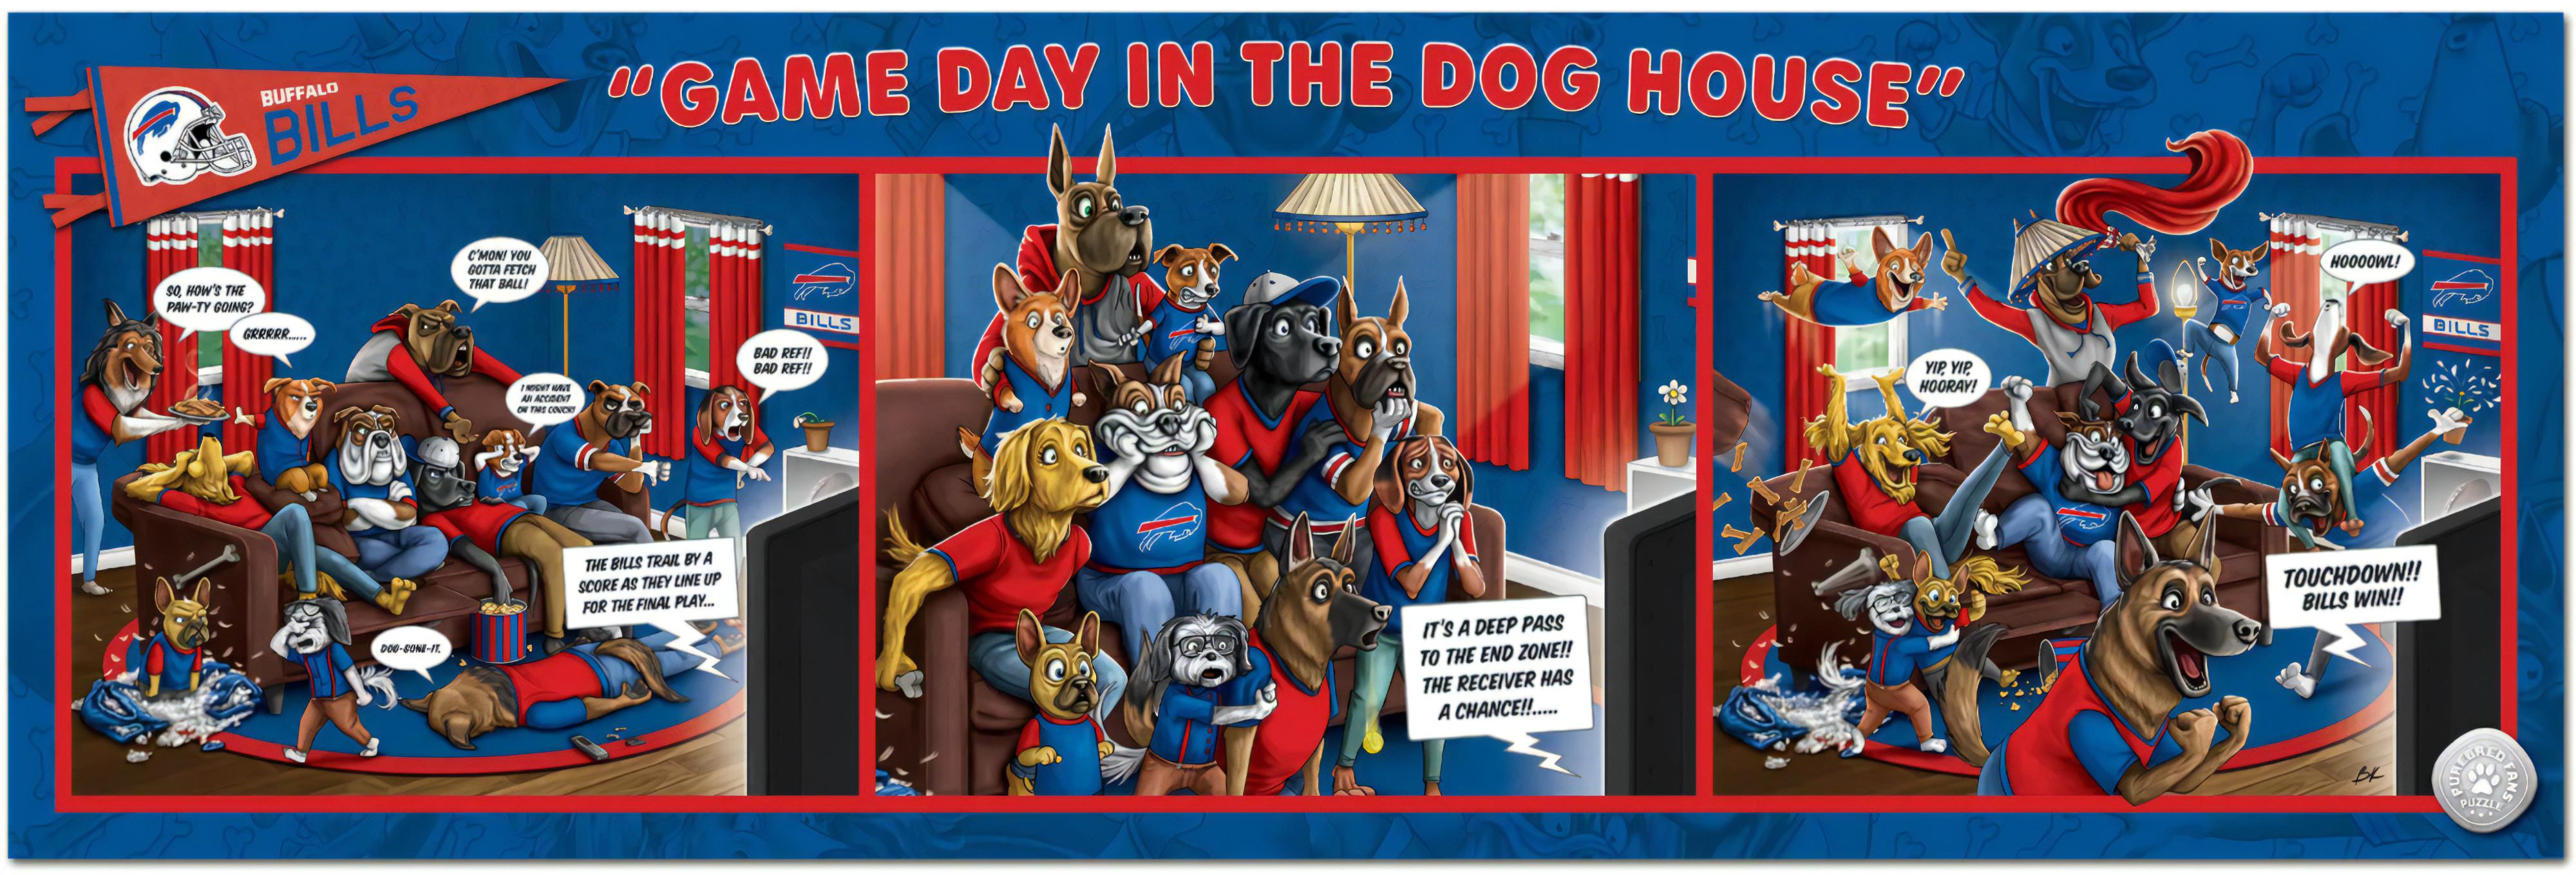 ROMPECABEZAS ″GAME DAY AT THE DOGS HOUSE″ 1000Pzas Bills